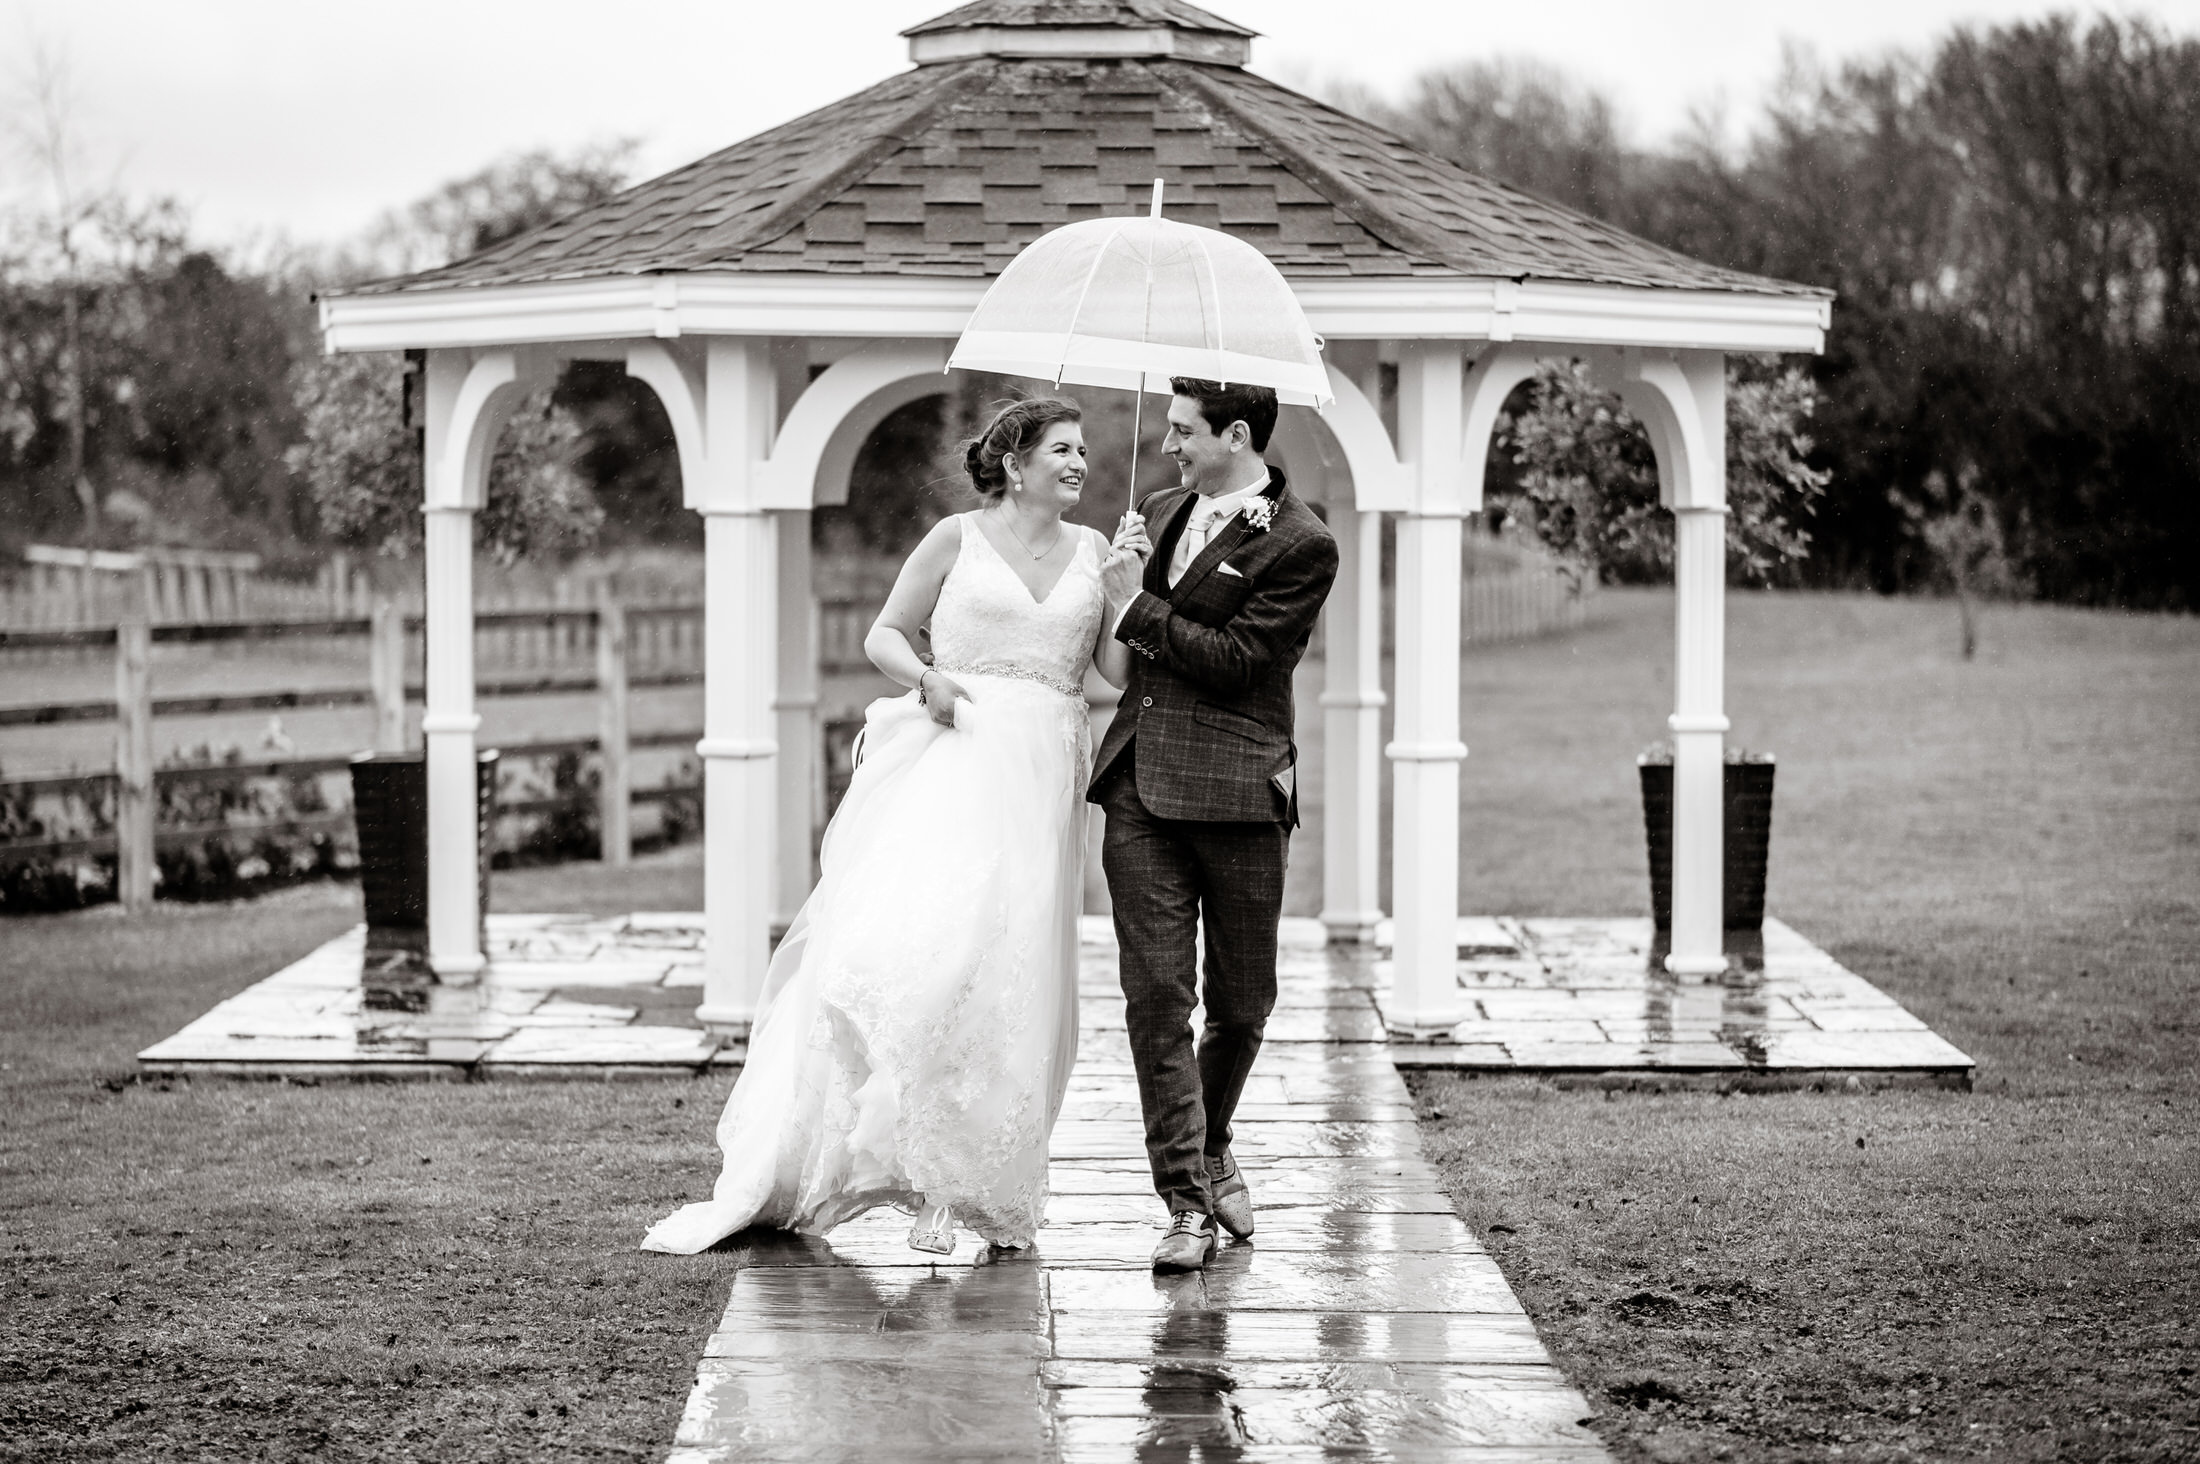 A bride and groom holding an umbrella in front of a gazebo at Brackenborough Hotel on their wedding day.